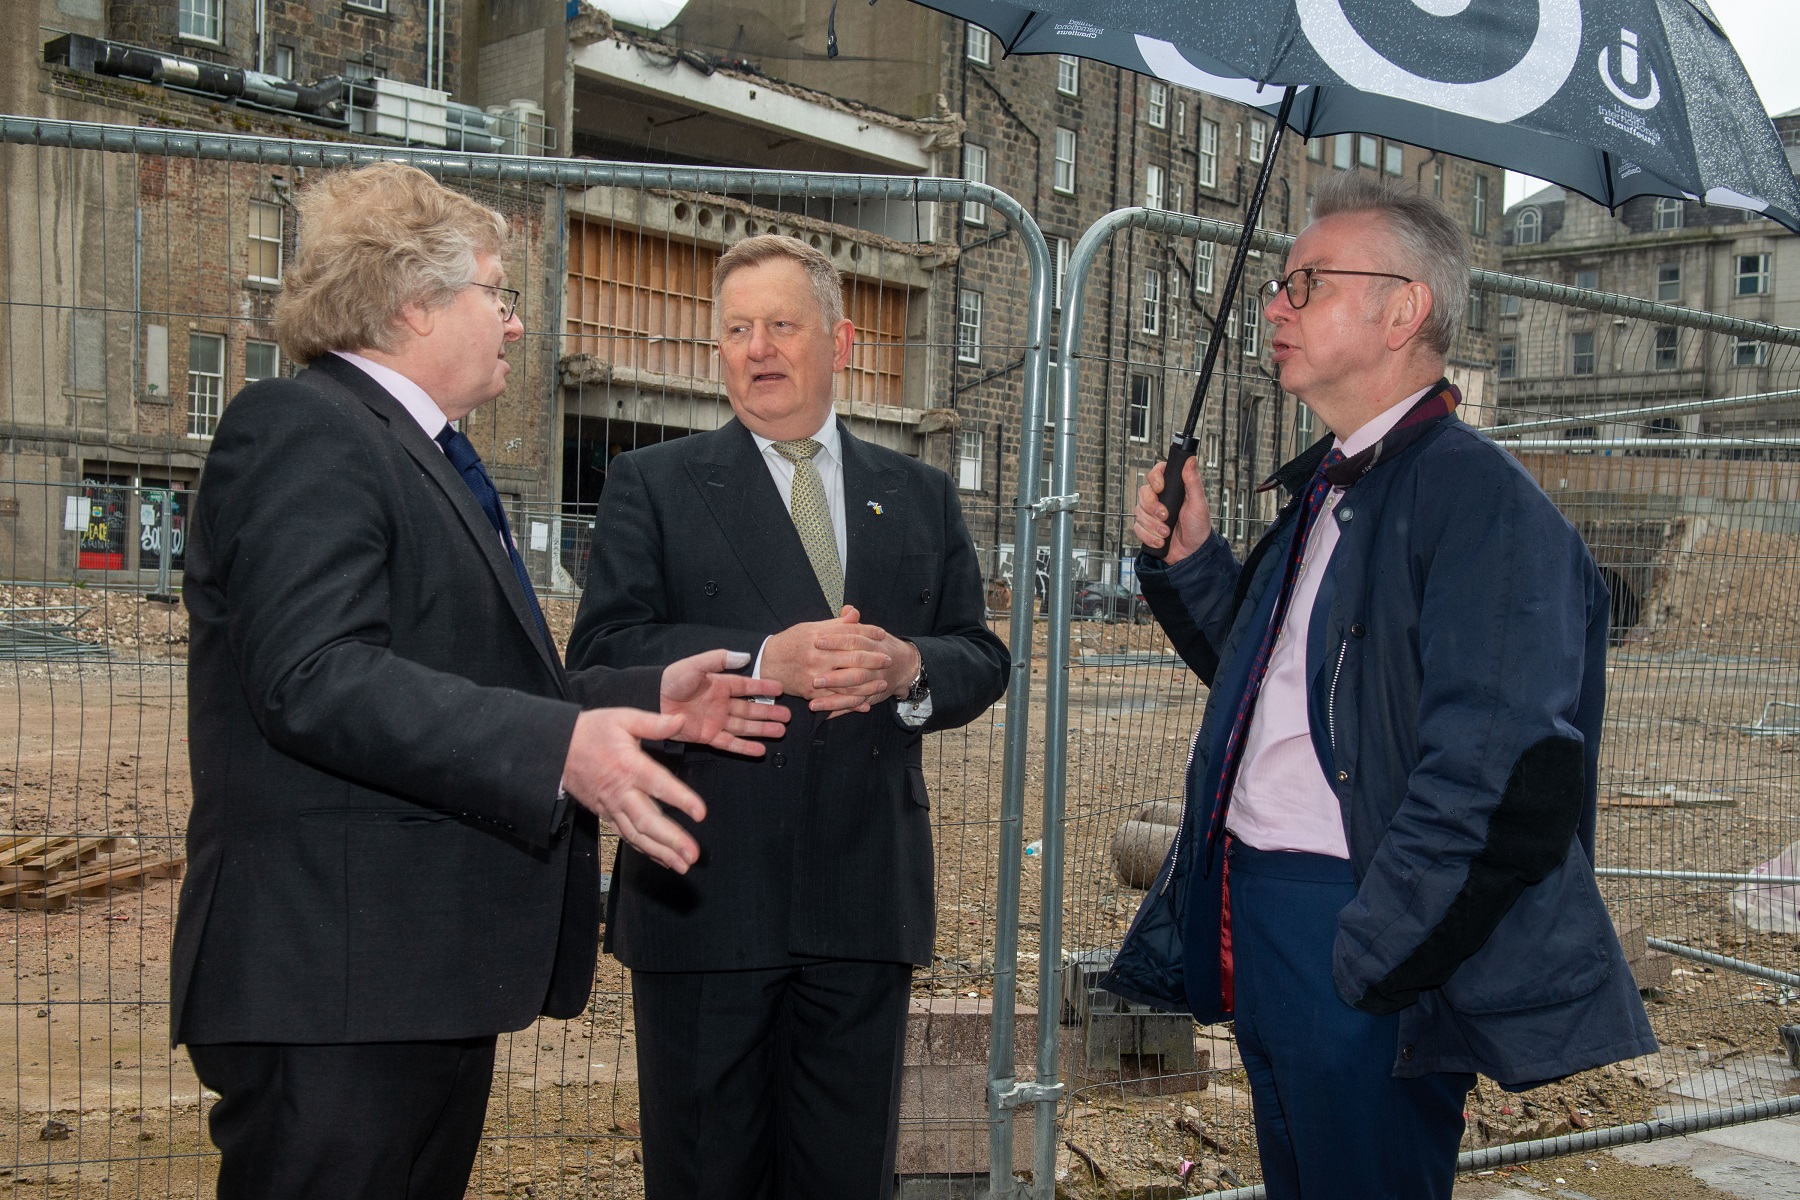 Levelling up minister Michael Gove visits Aberdeen market site